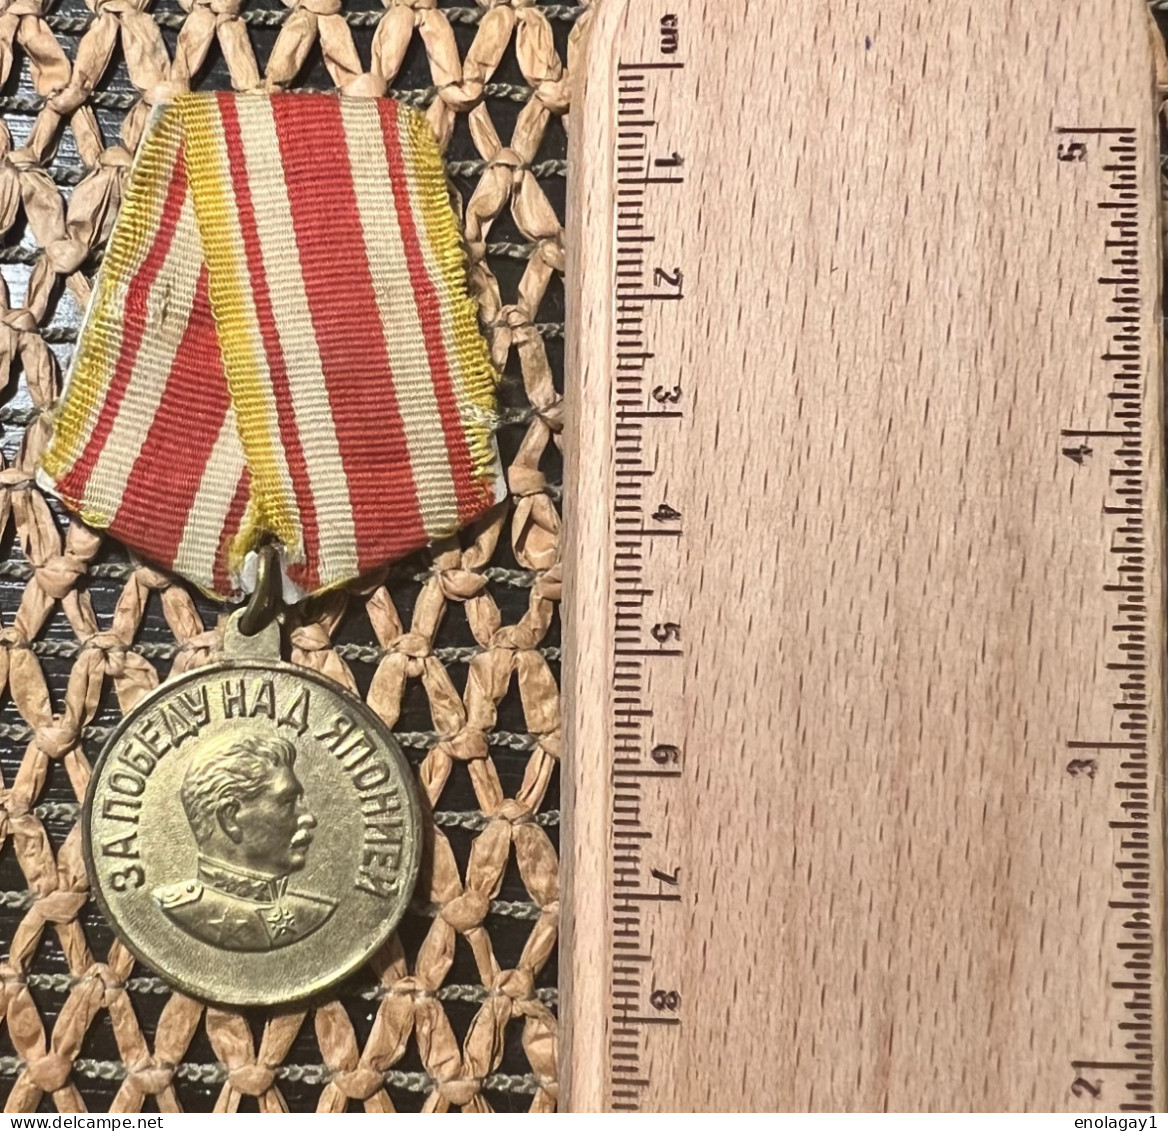 USSR Soviet Medal Victory Over Japan - Rusia